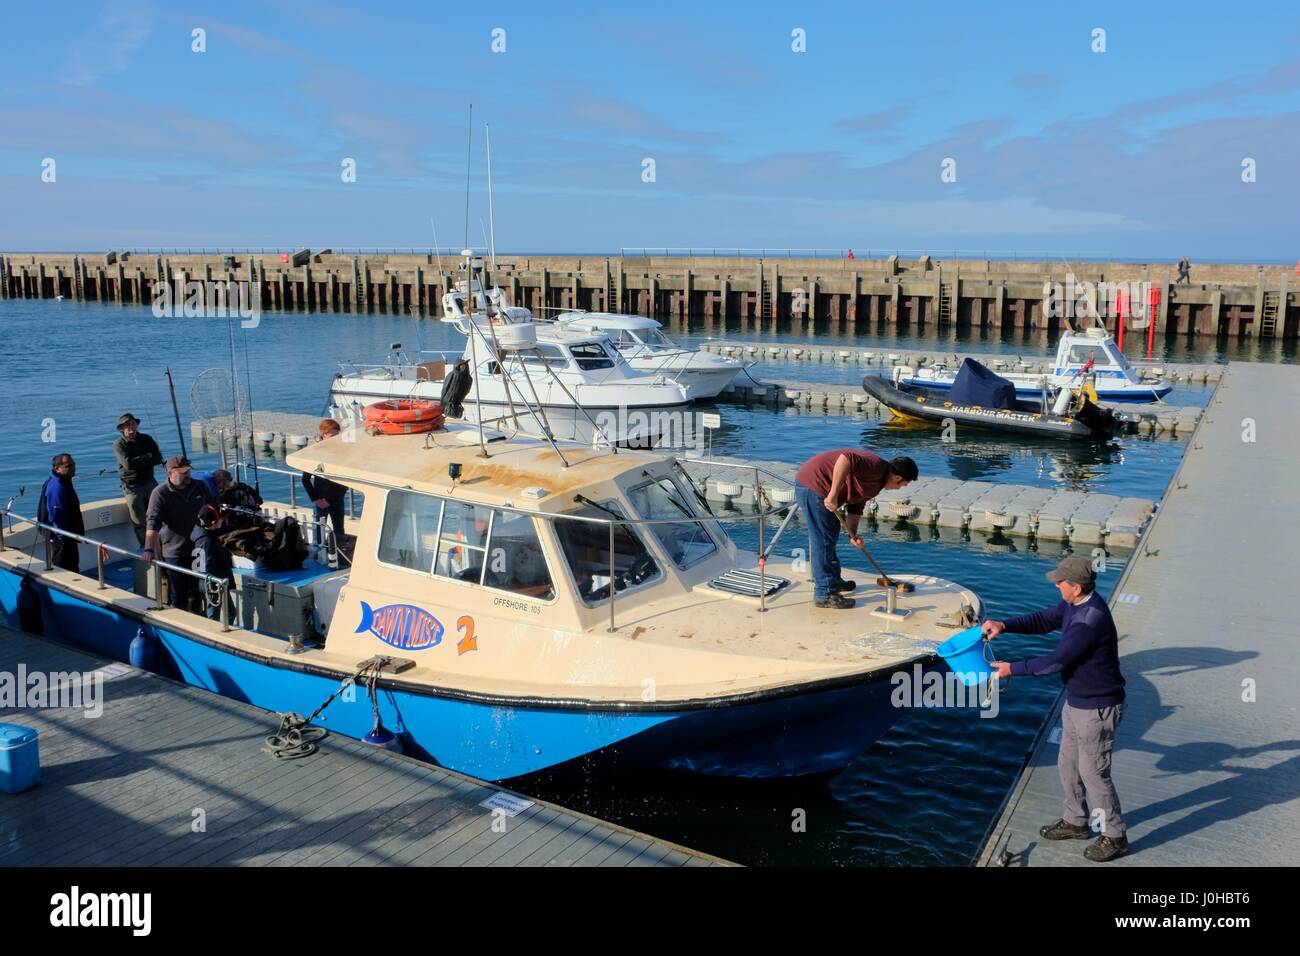 West Bay, Dorset, UK. 14th Apr, 2017. A fishing boat is given a final wash as anglers wait fir the start of their fishing trip from a sunny West Bay harbour on the Dorset coast. Credit: Tom Corban/Alamy Live News Stock Photo